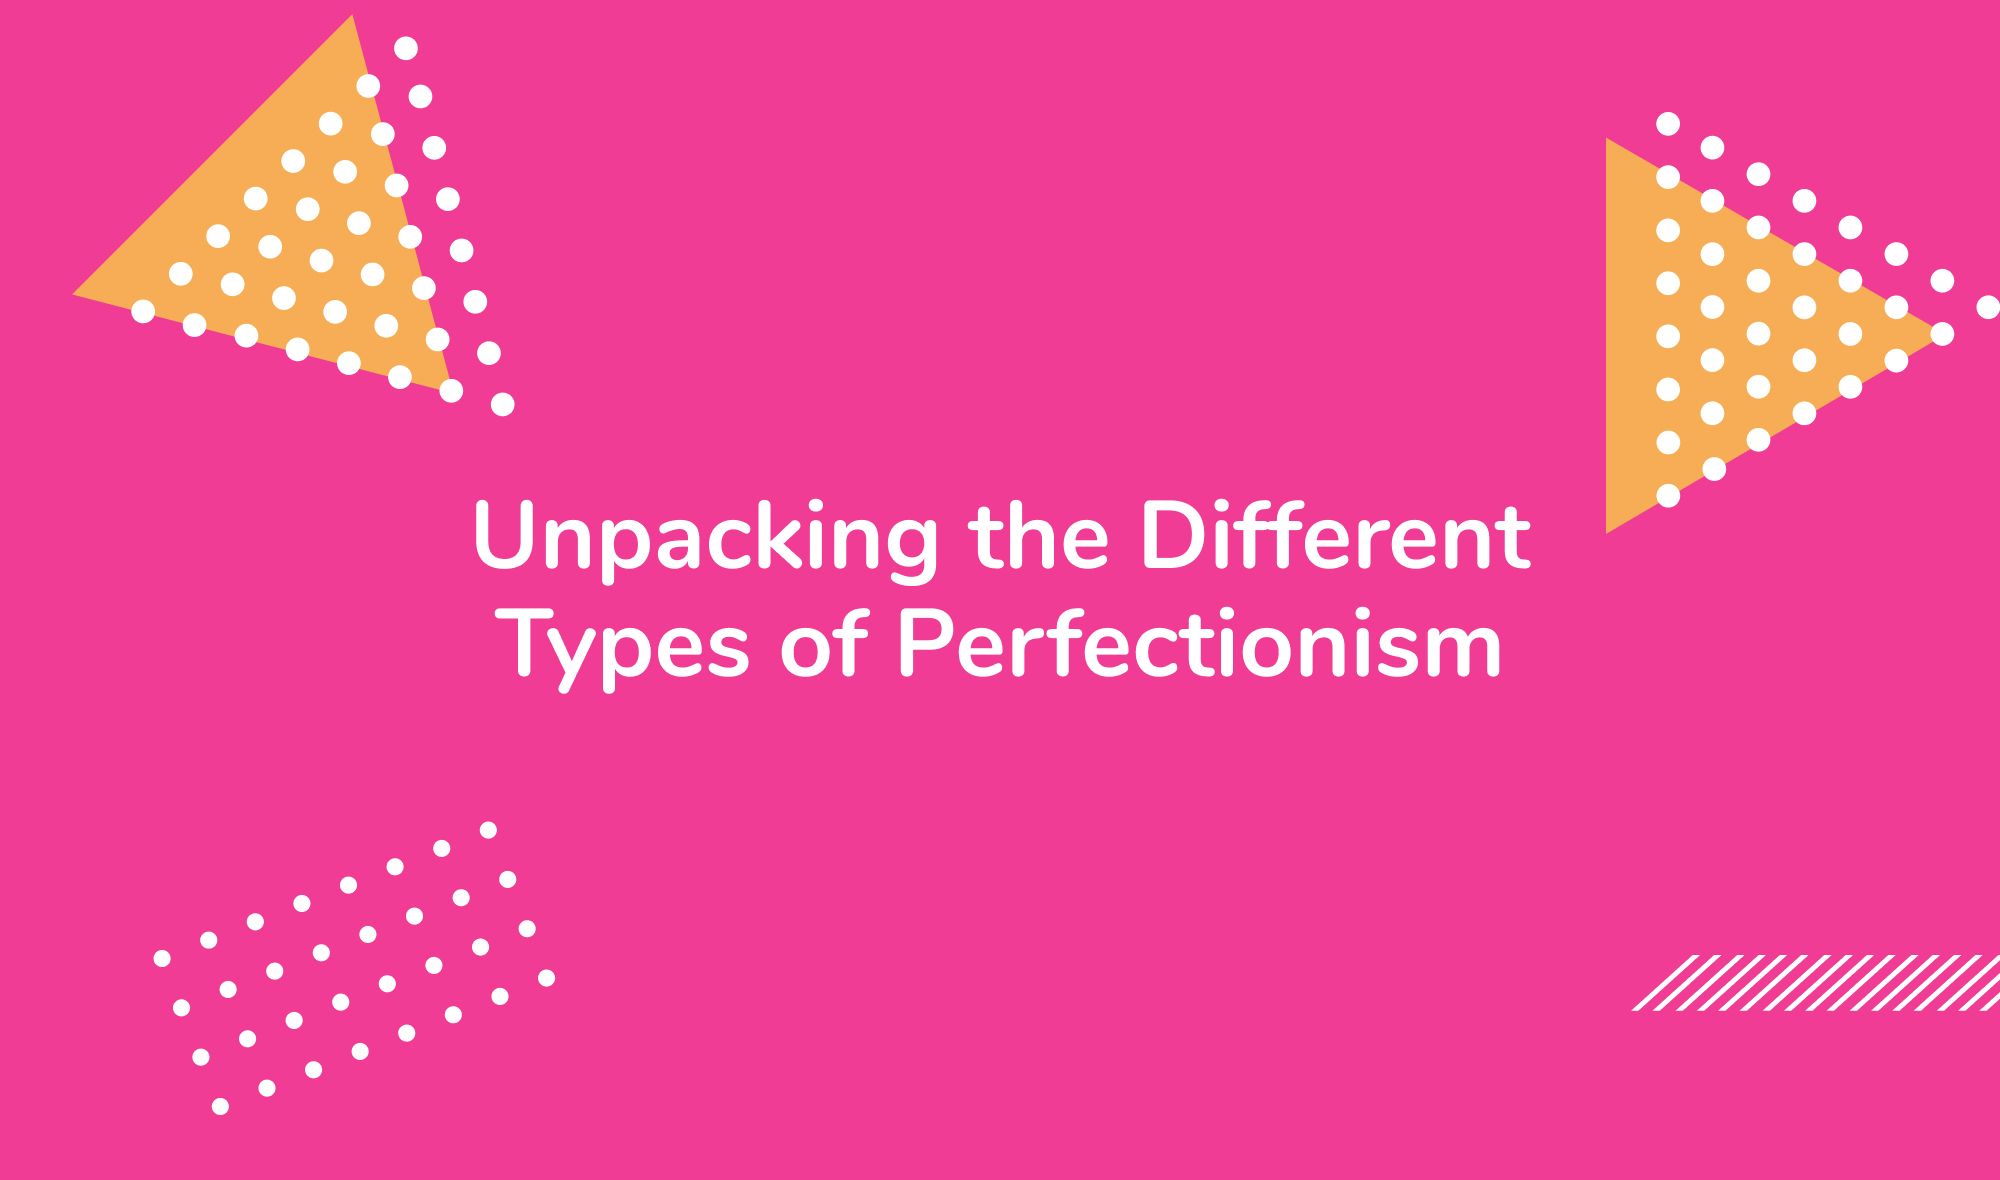 Unpacking the Different Types of Perfectionism